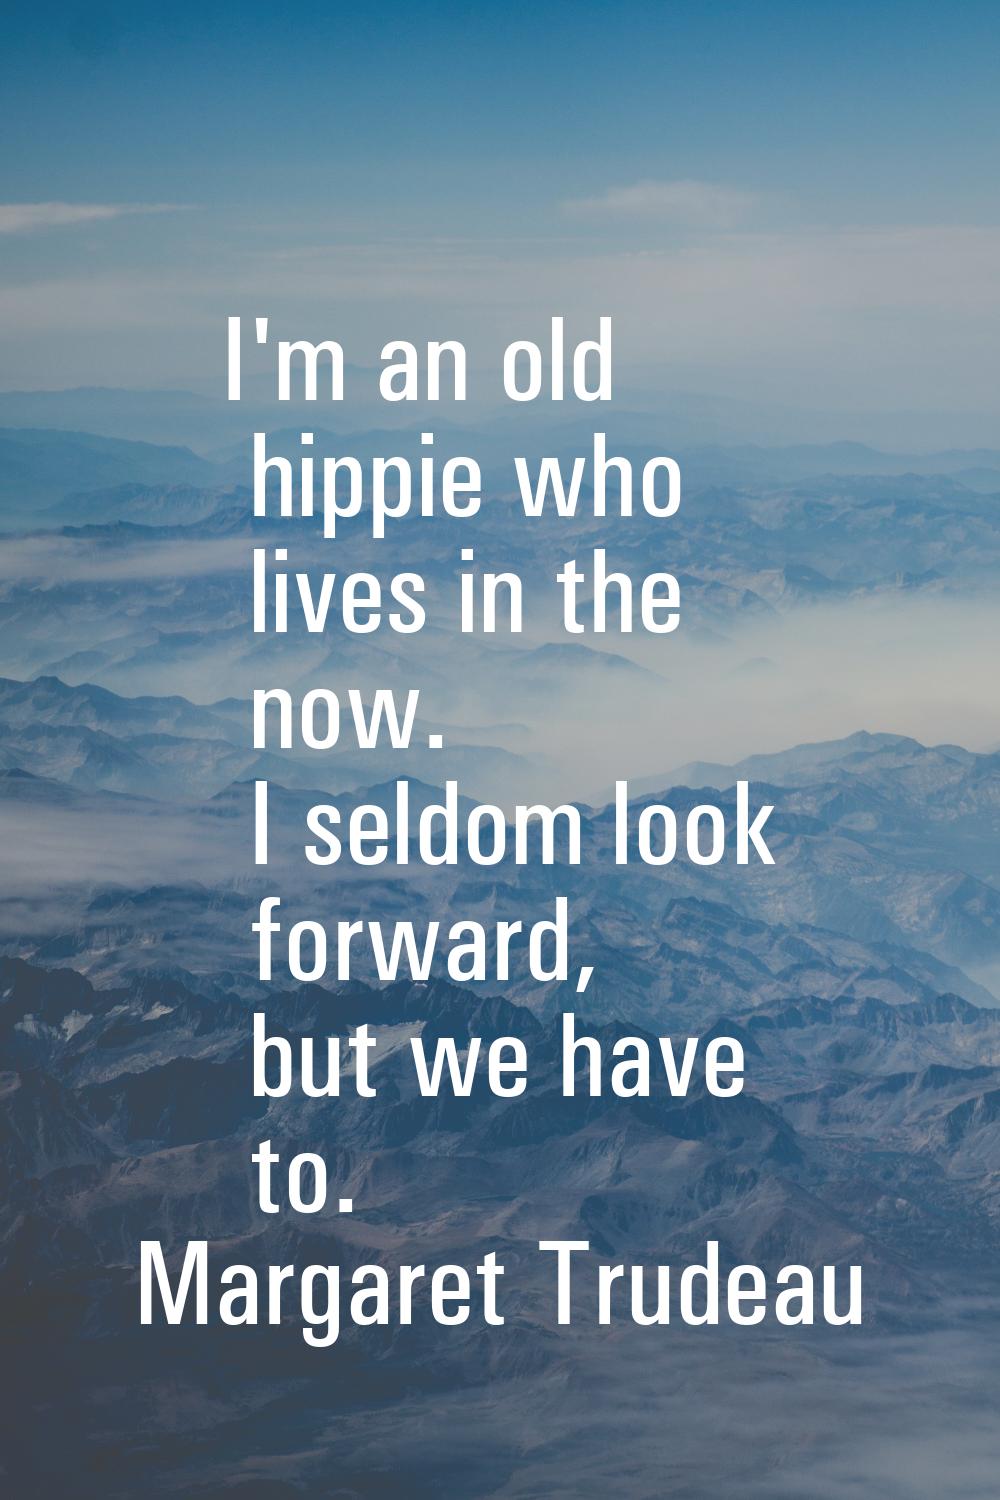 I'm an old hippie who lives in the now. I seldom look forward, but we have to.